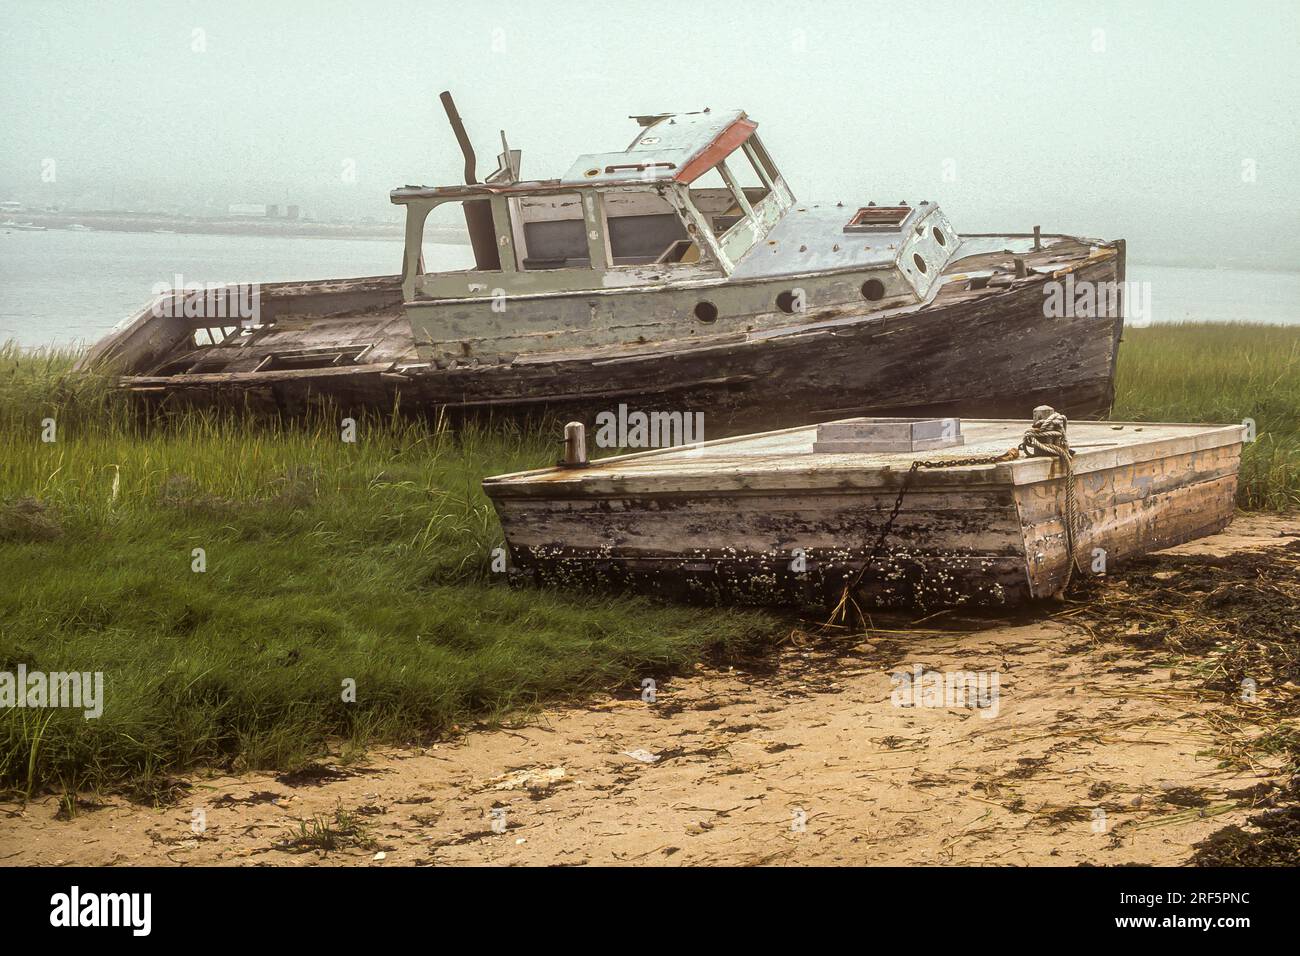 https://c8.alamy.com/comp/2RF5PNC/an-old-fishing-boat-beached-on-shore-on-cape-cod-2RF5PNC.jpg